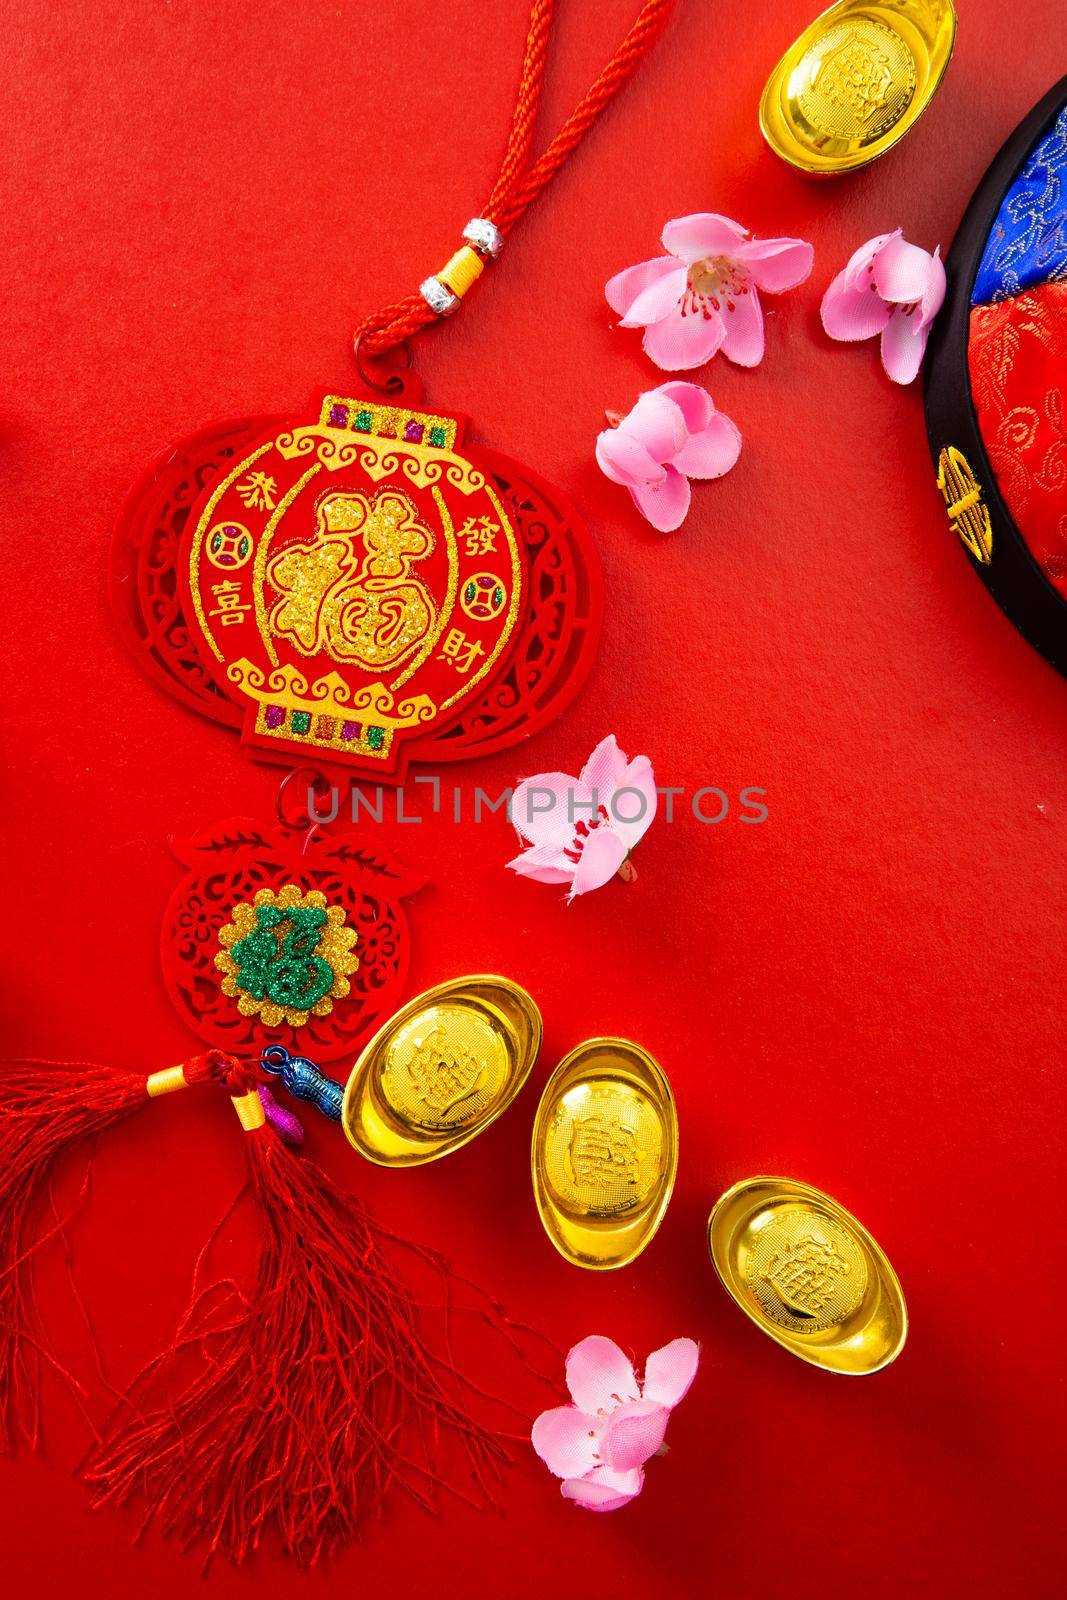 Translation of text appear in image: Prosperity and Spring. Flat lay Chinese new year